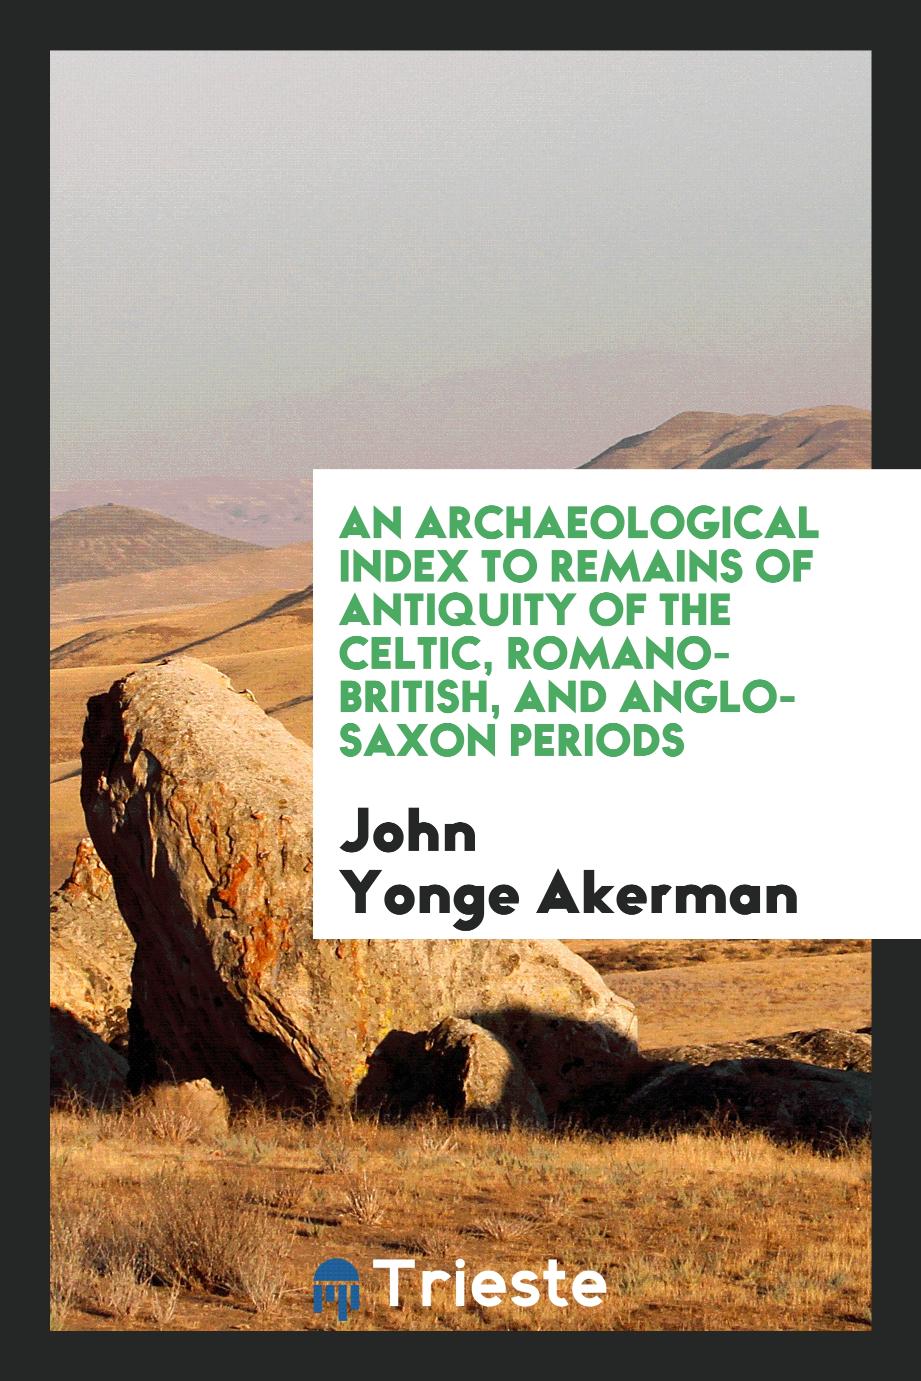 An Archaeological Index to Remains of Antiquity of the Celtic, Romano-British, and Anglo-Saxon Periods